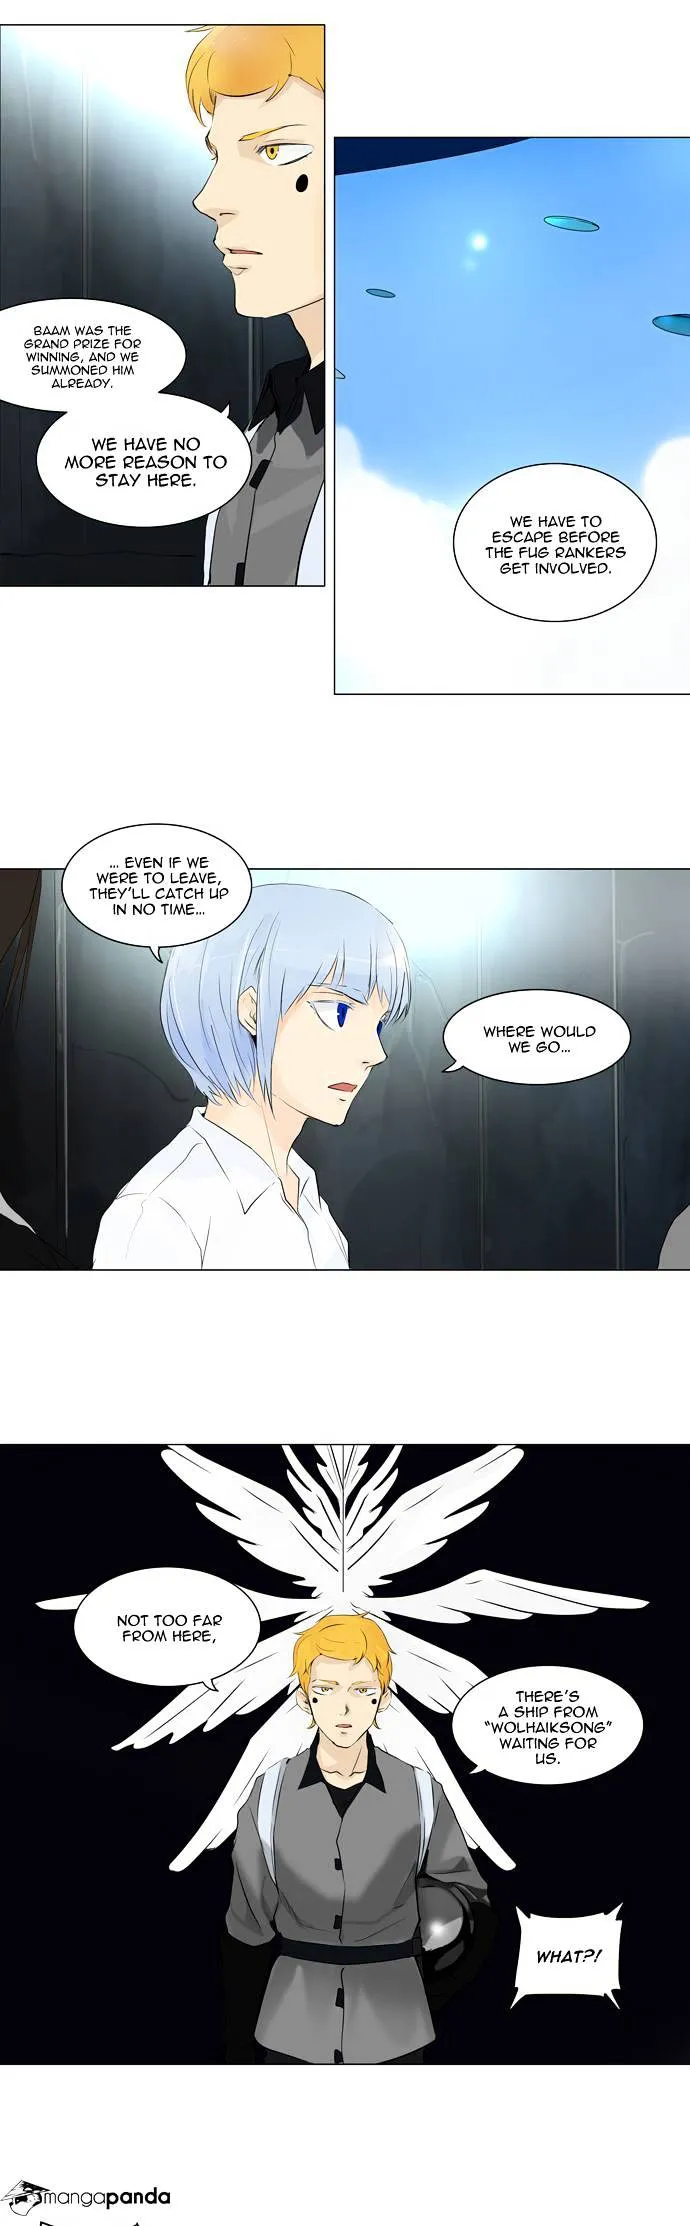 Tower of God Chapter 178 page 5